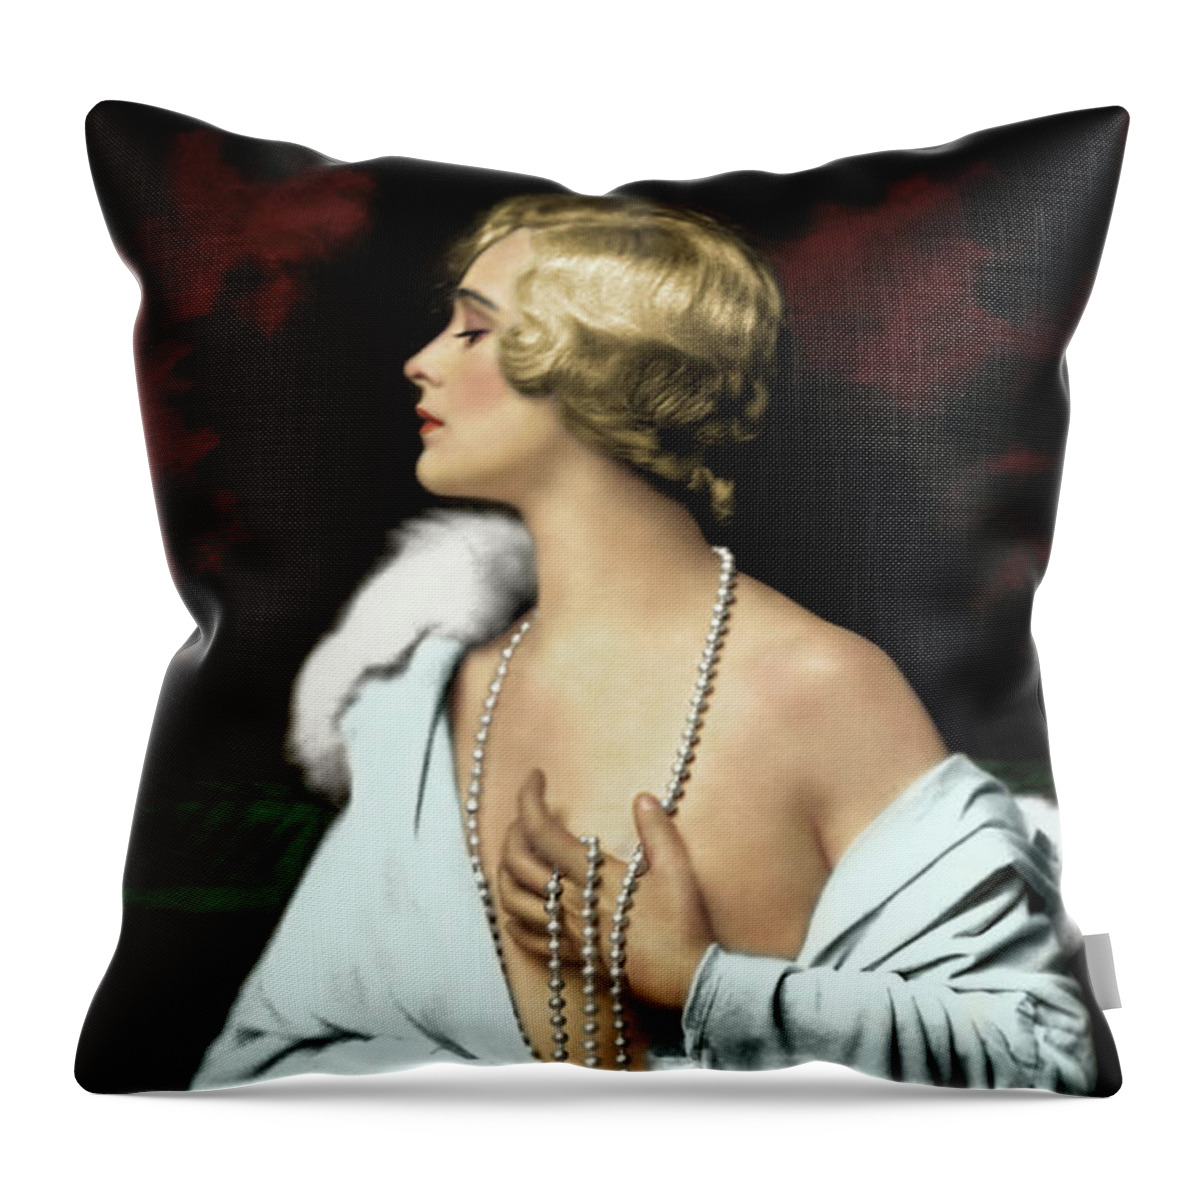 Vintage Throw Pillow featuring the digital art Pearls by Franchi Torres